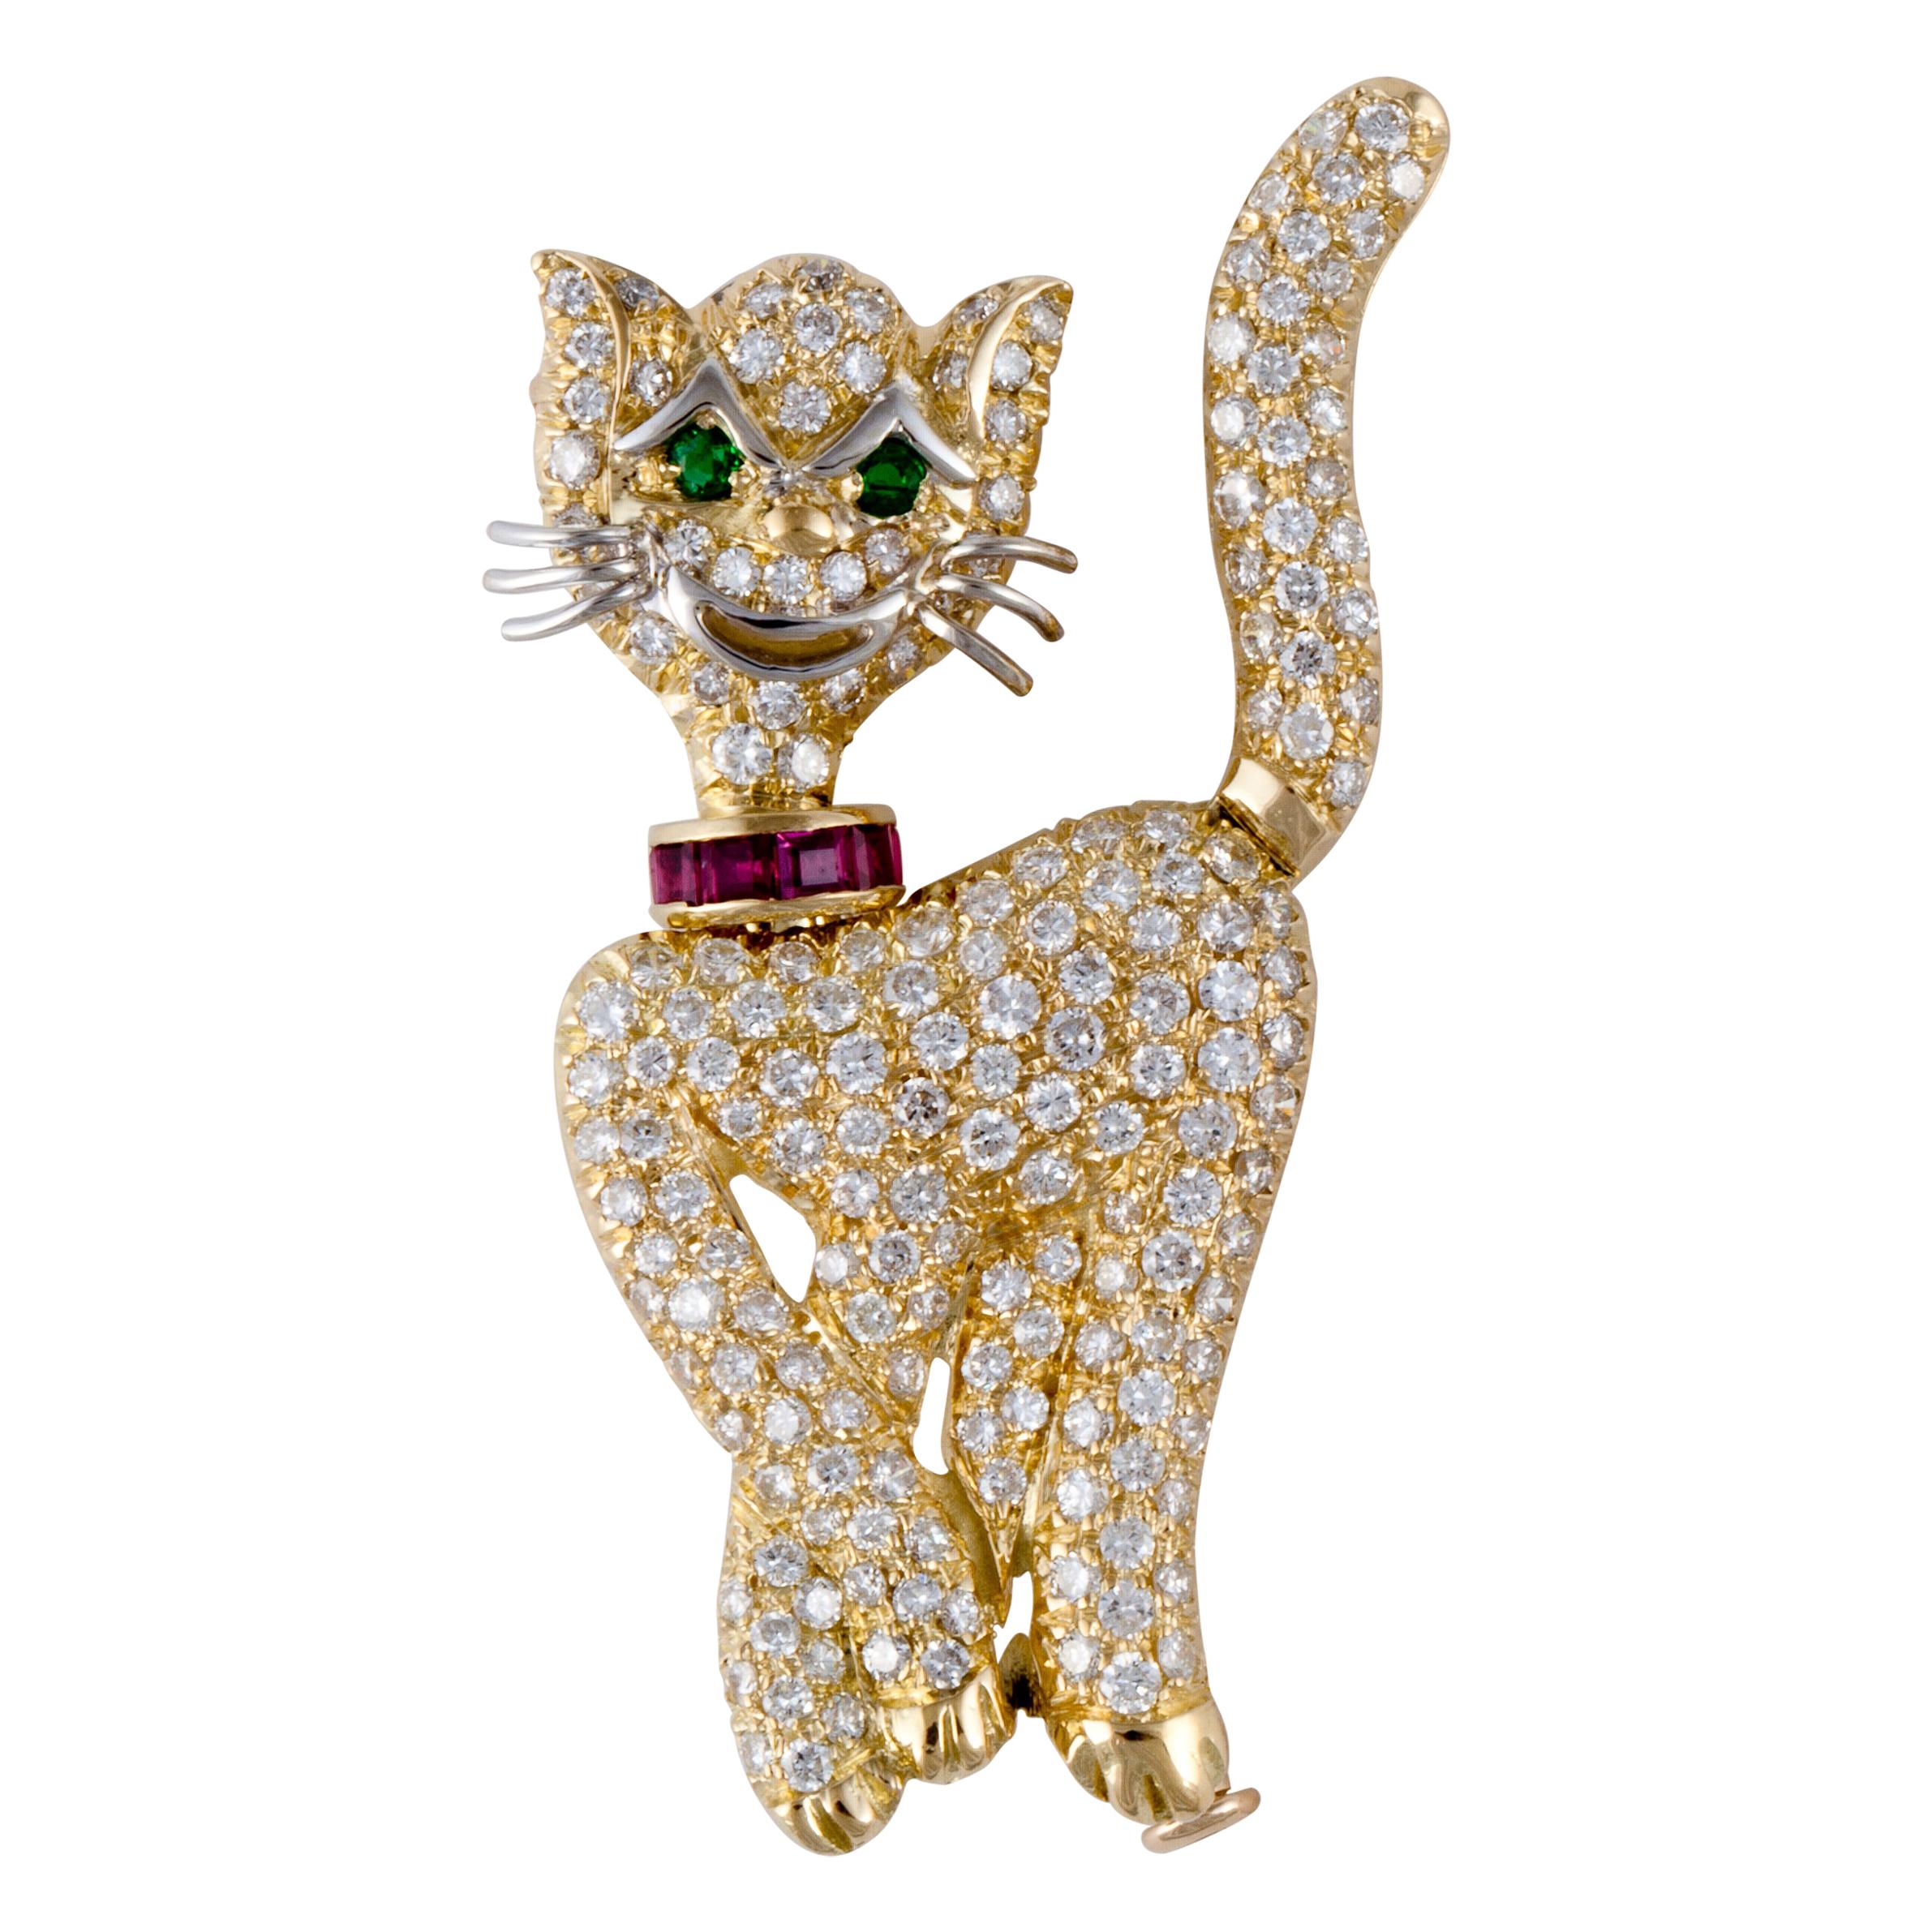 Details about   Cat Kitten Pin Brooch Large 24 Karat Gold Plate or Antiqued Pewter Kitty Tomcat 